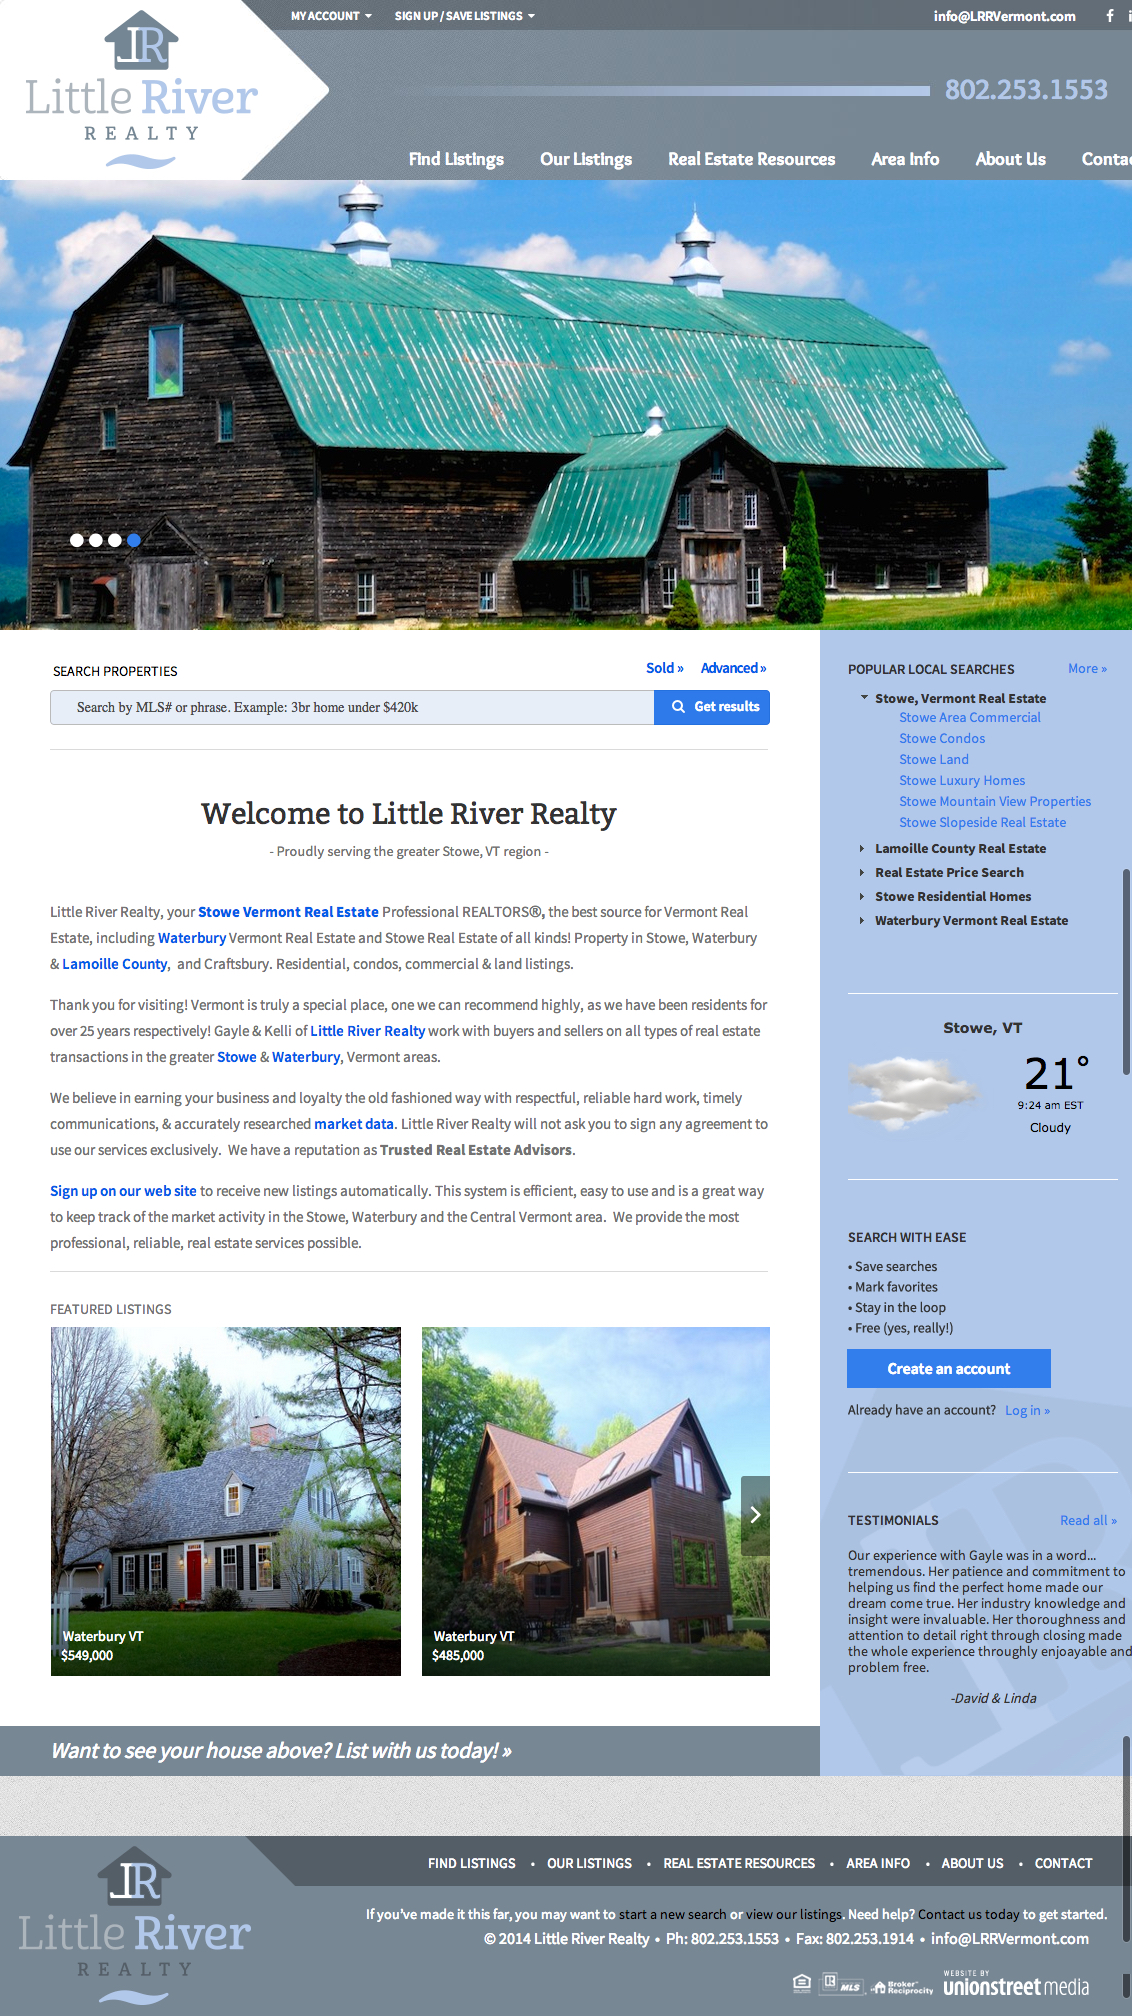 Stowe VT Real Estate   Stowe Homes for Sale   Little River Realty